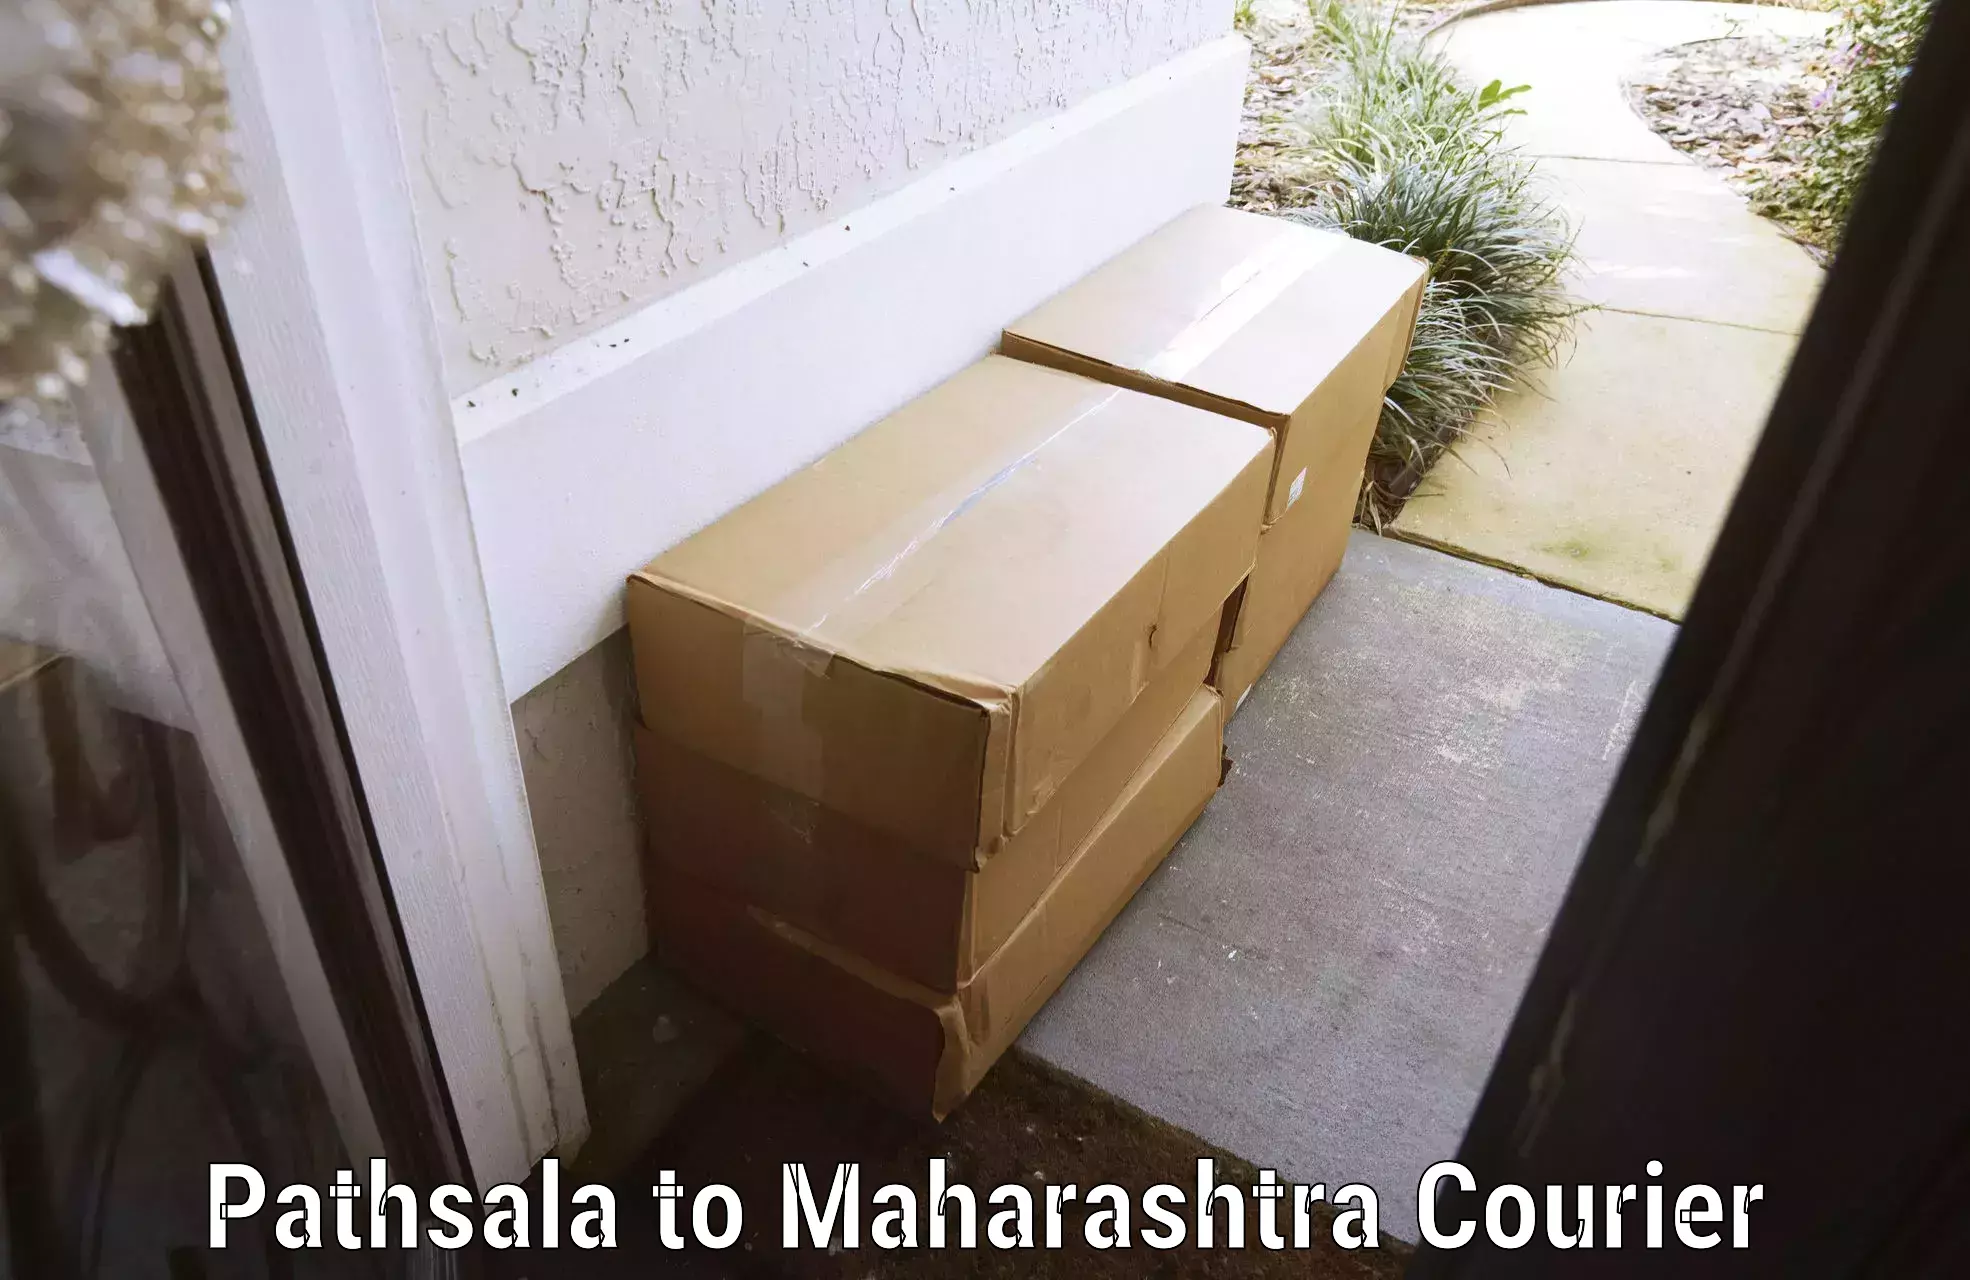 Baggage shipping experience in Pathsala to Lonavala